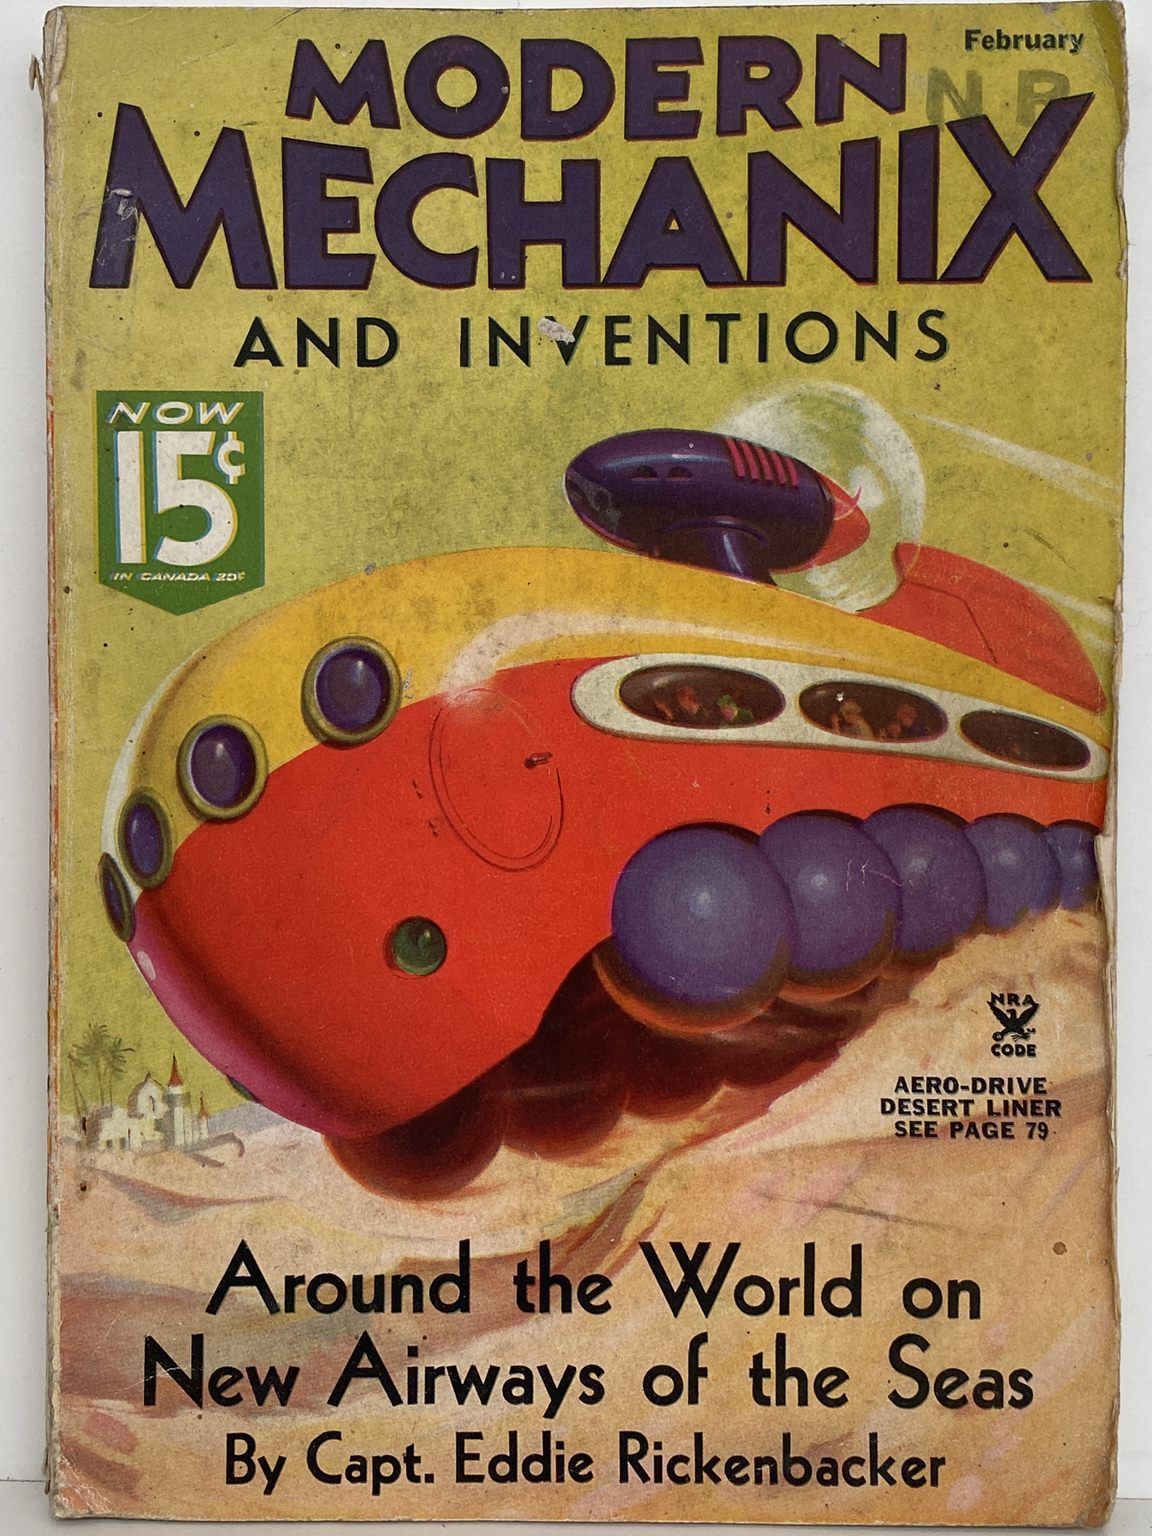 VINTAGE MAGAZINE: Modern Mechanix and Inventions - Vol 13, No. 4 - February 1935